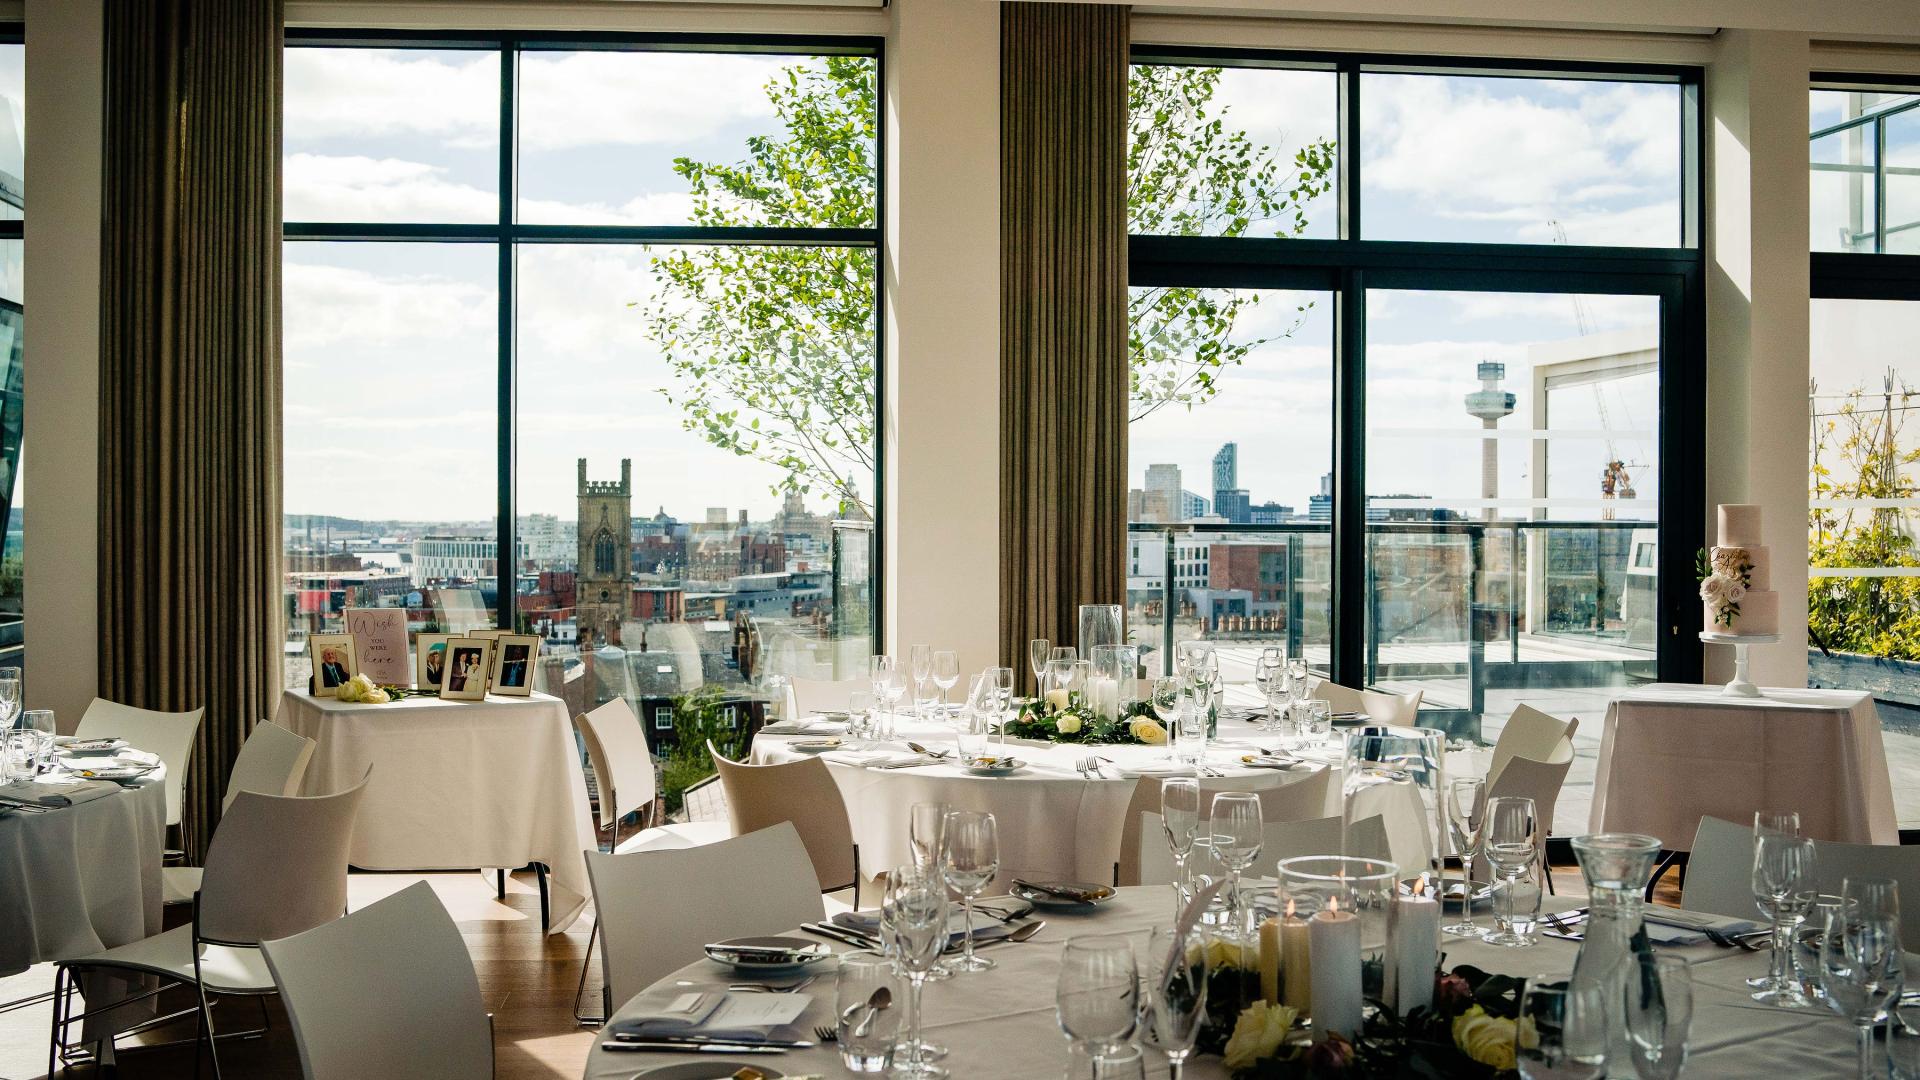 Find your Affordable Wedding Venue in Liverpool